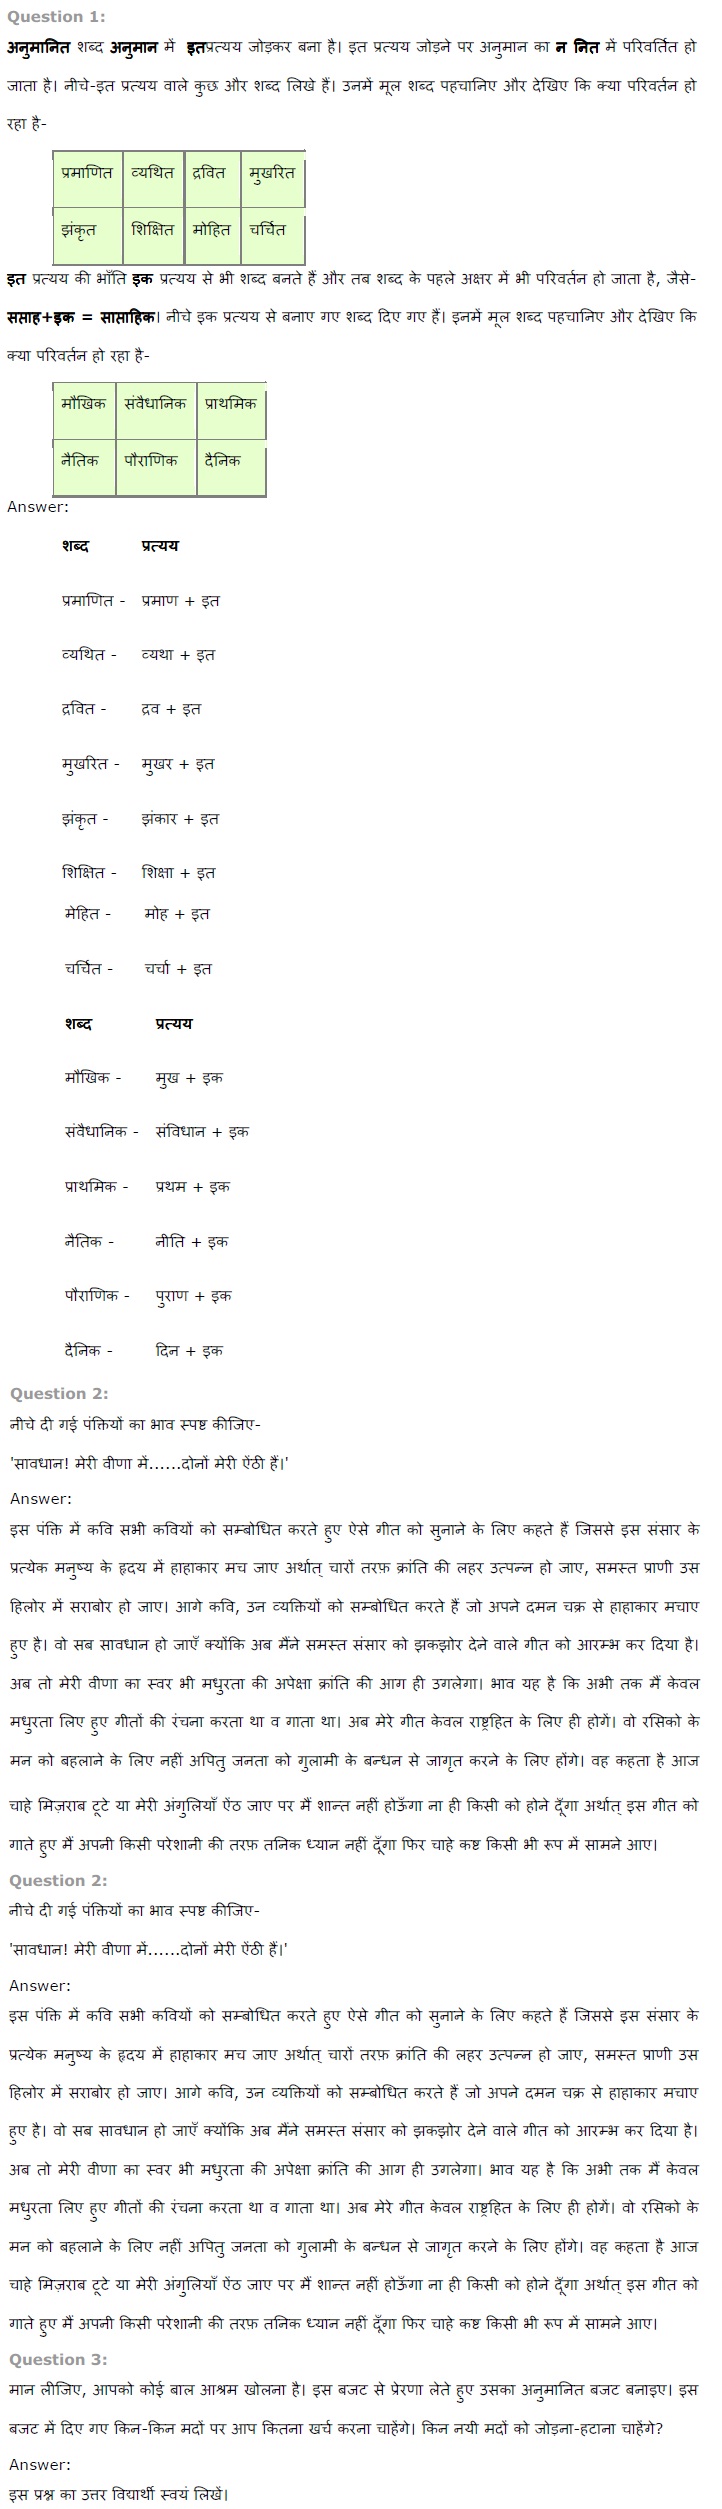 NCERT Solutions for Class 7 Hindi Chapter 20 विप्लव गायन PDF Download